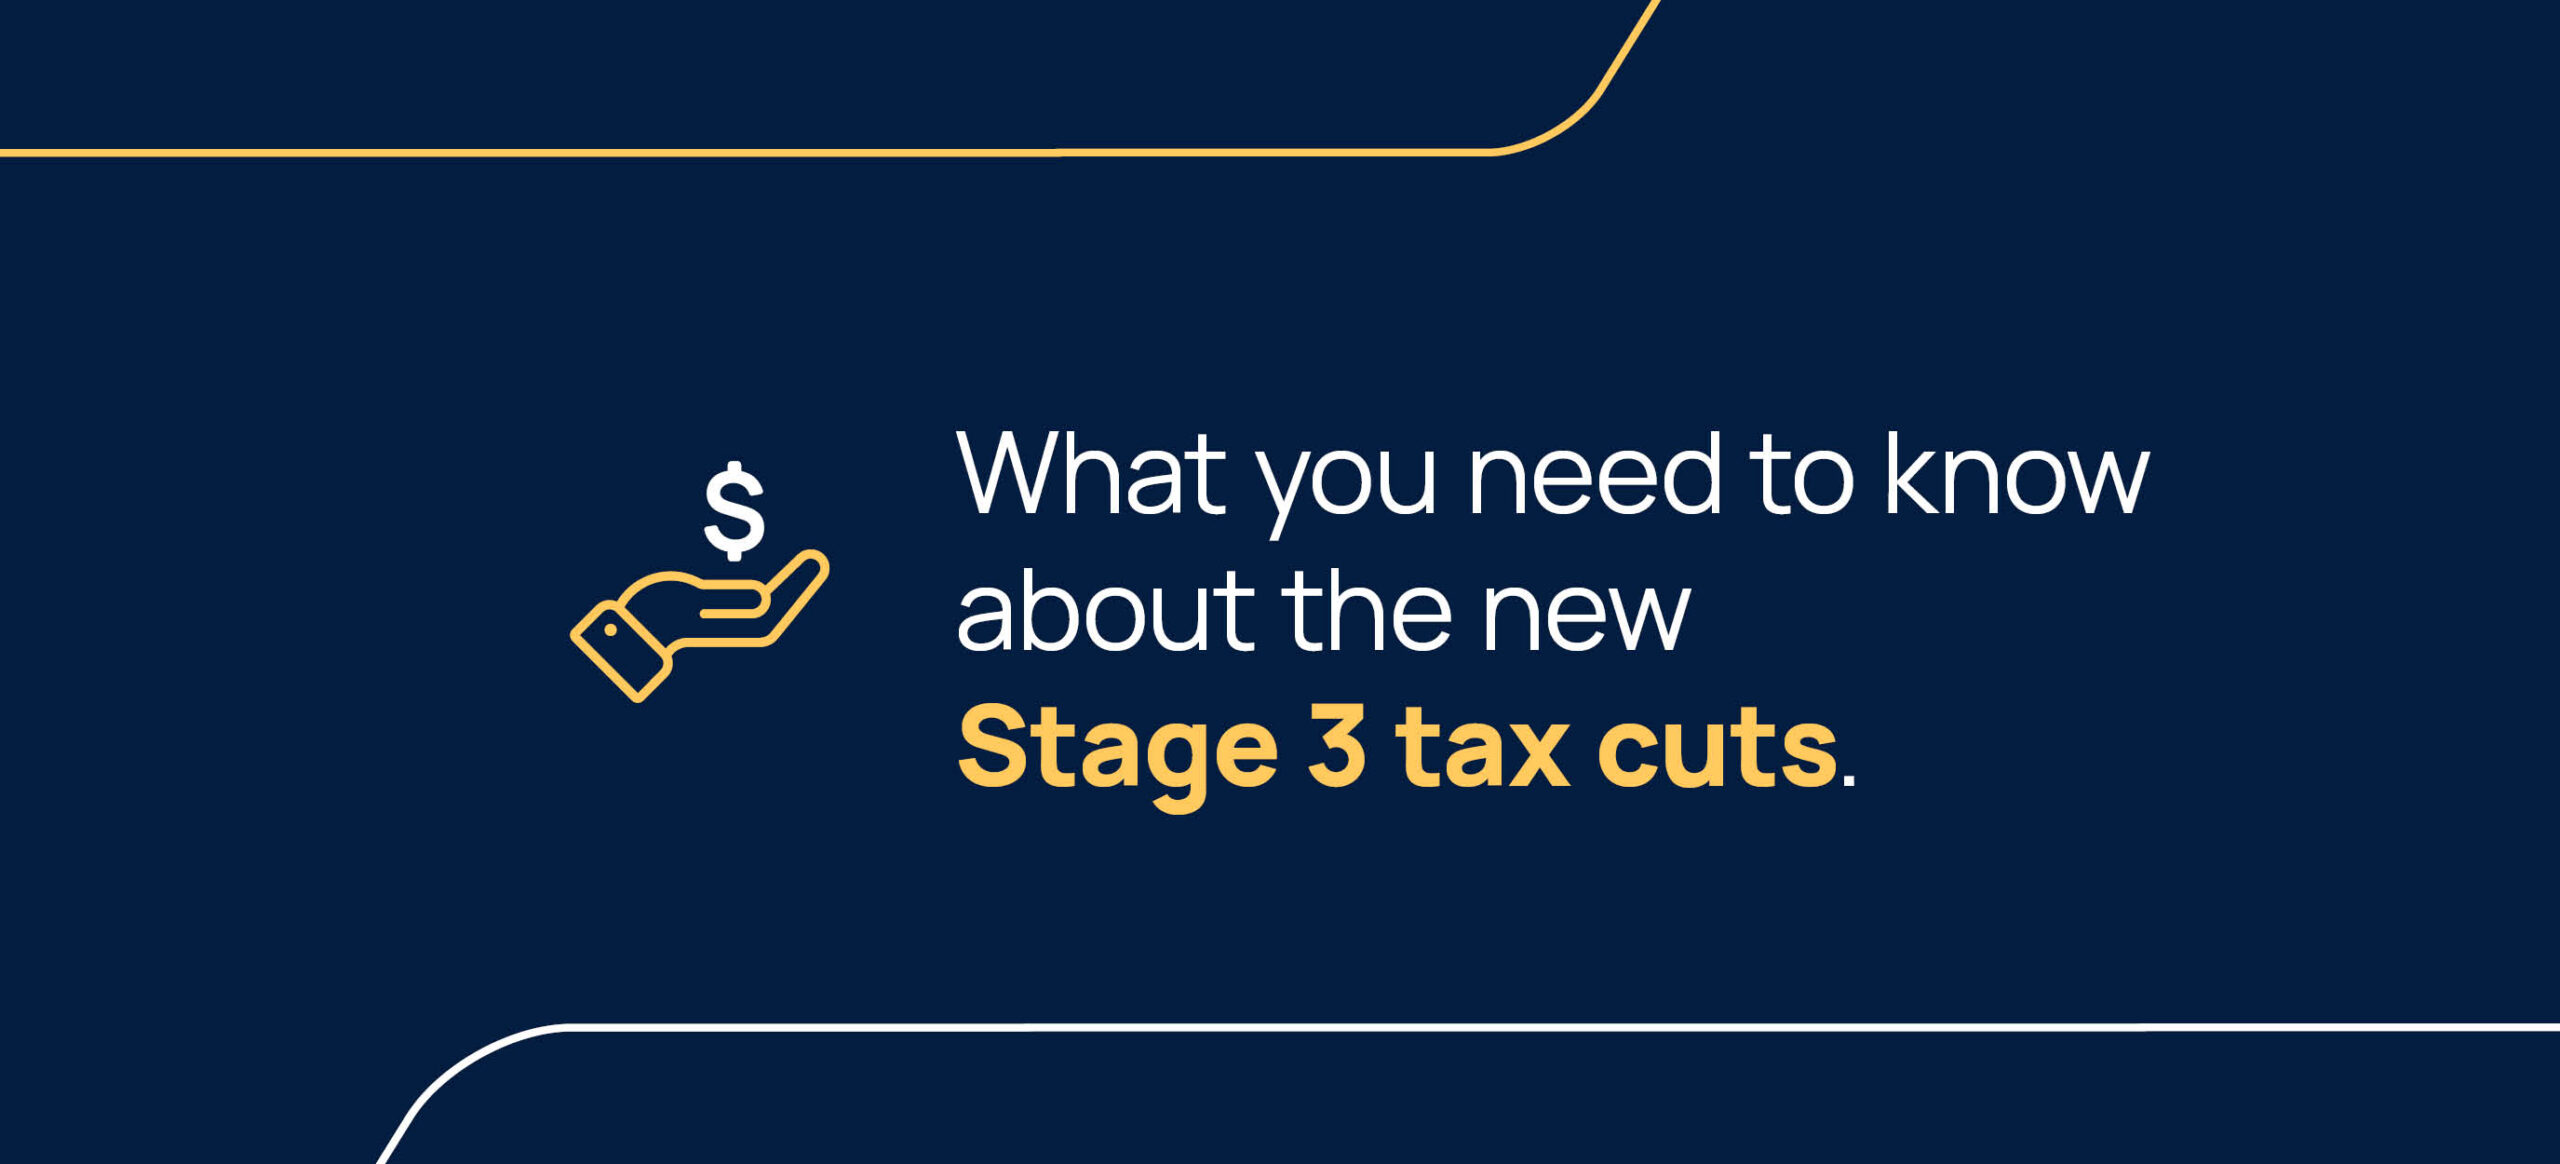 What you need to know about the new Stage 3 tax cuts.